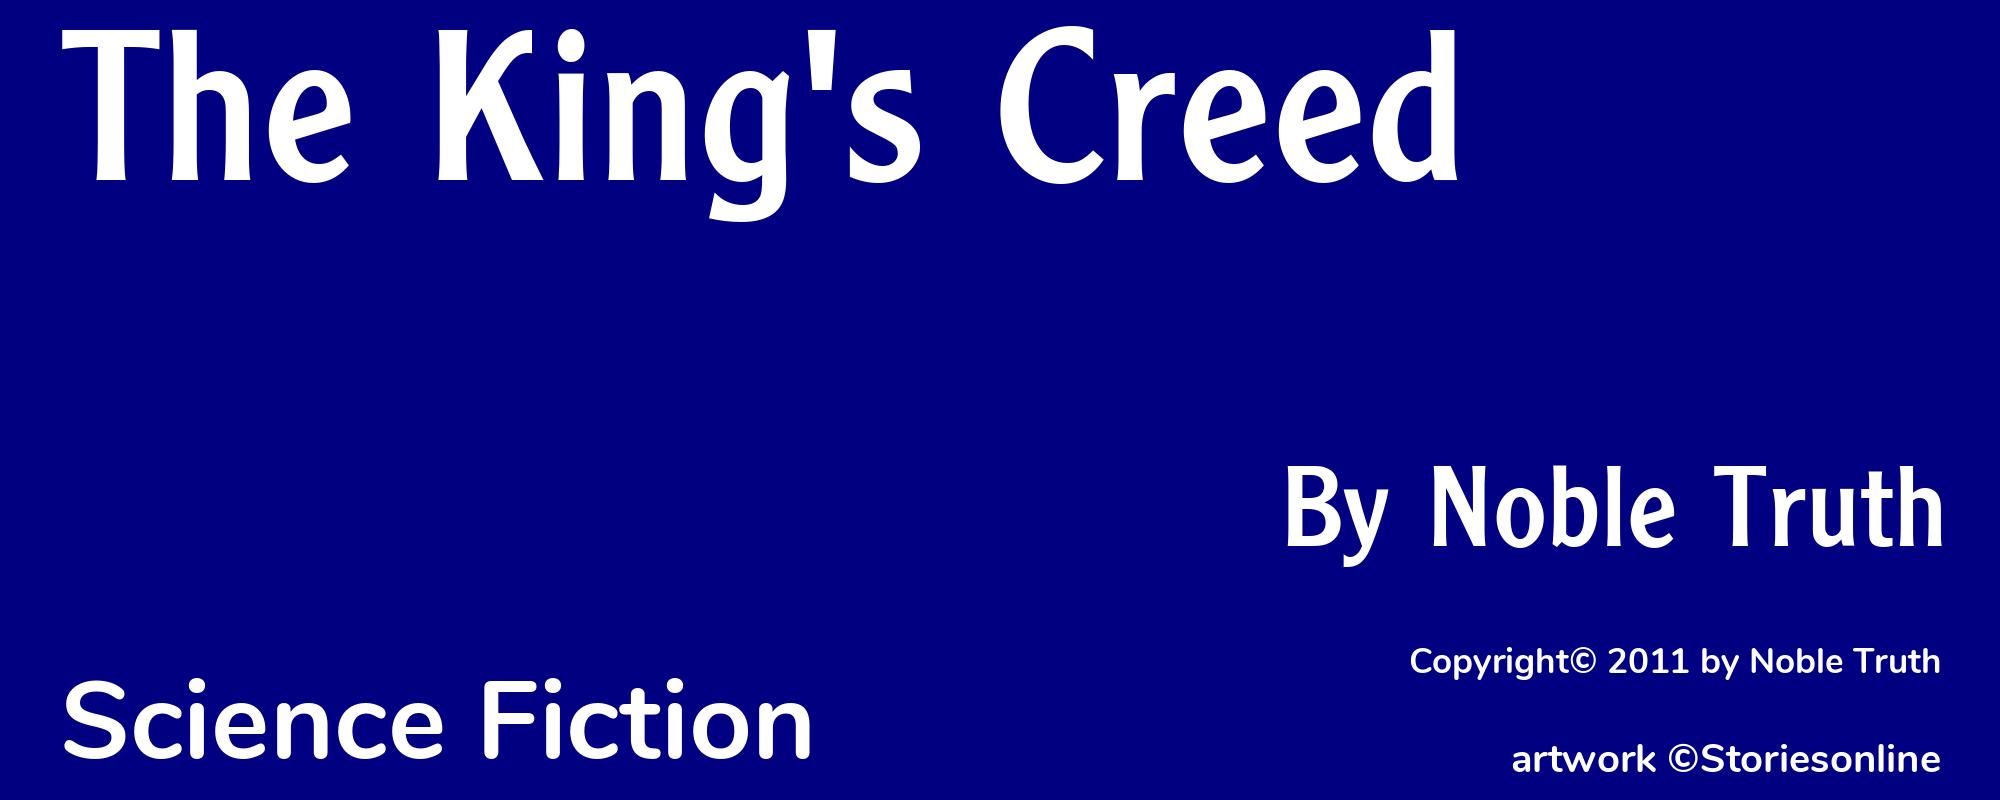 The King's Creed - Cover